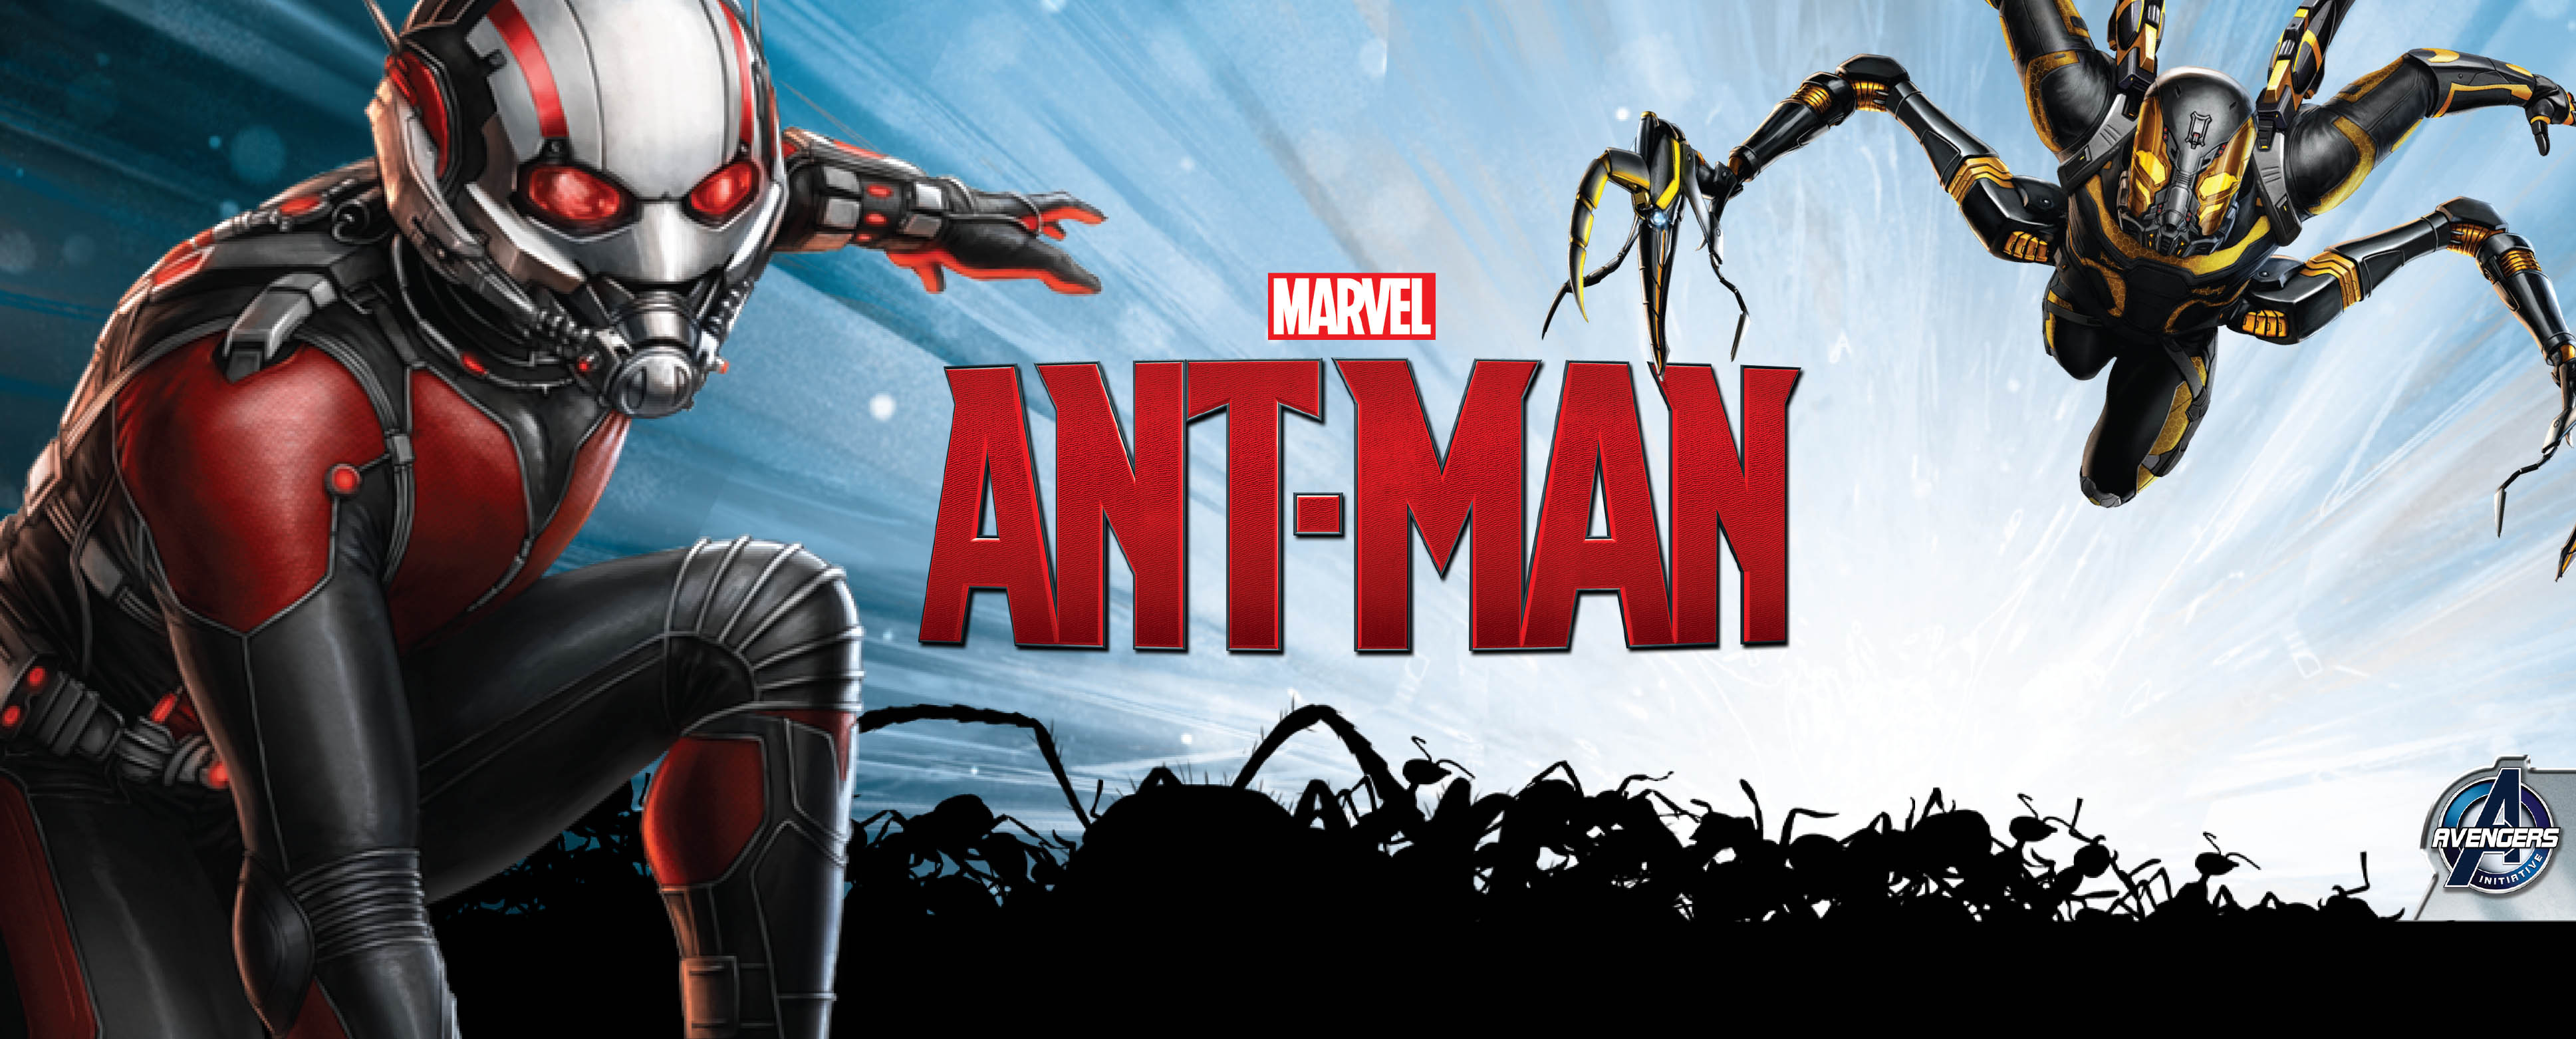 rumor i<strong>s</strong> that the ant man trailer is coming soon&8230; maybe